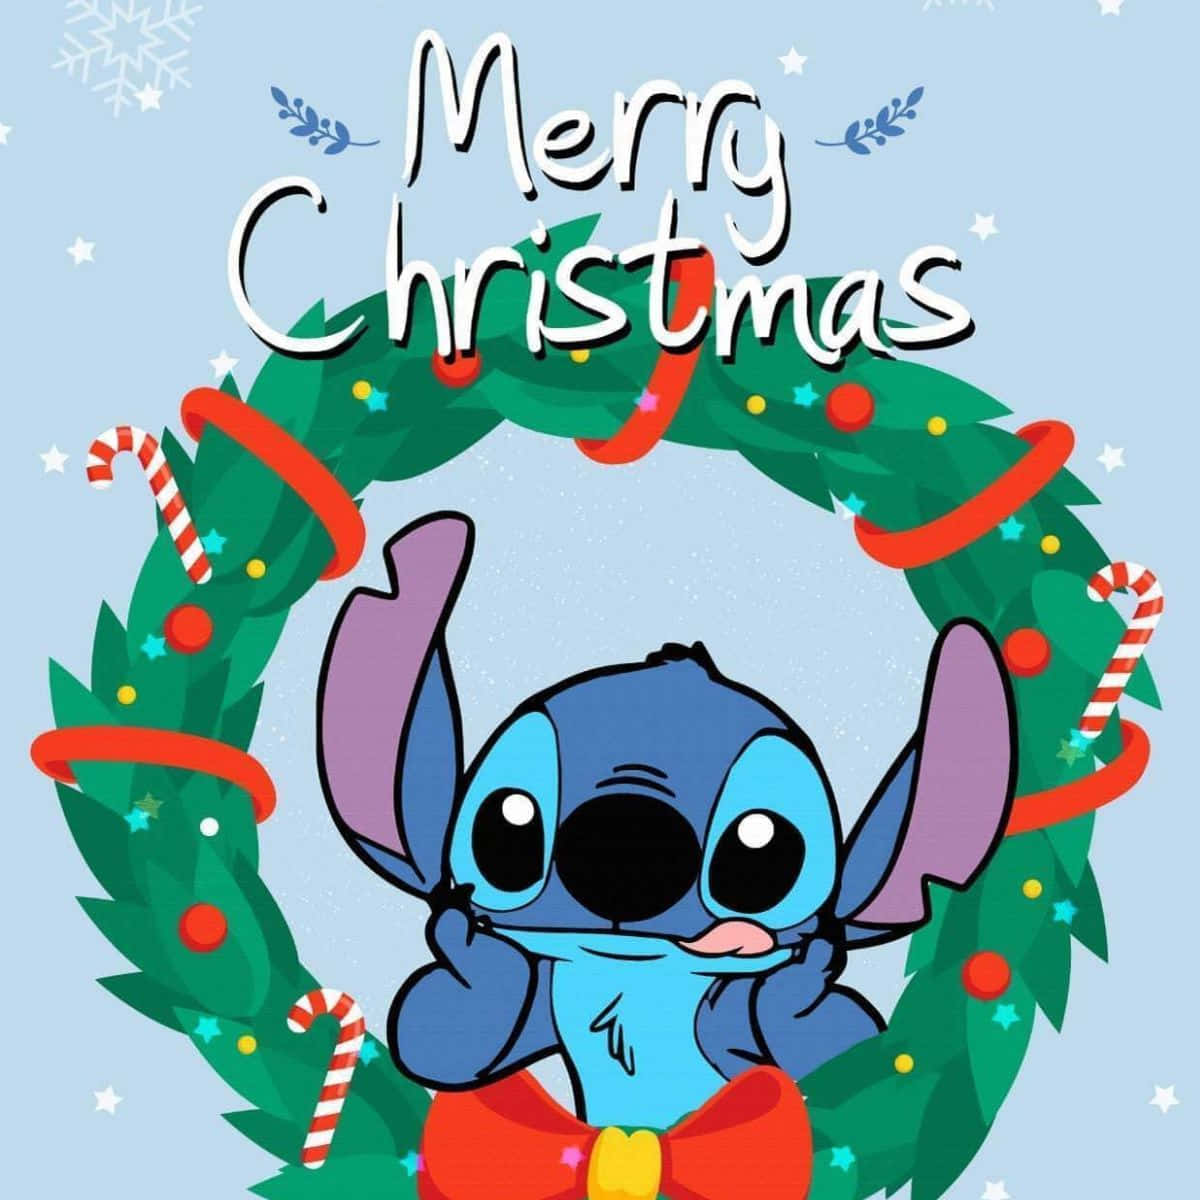 Download Disney Christmas 1200 X 1200 Background | Wallpapers.com